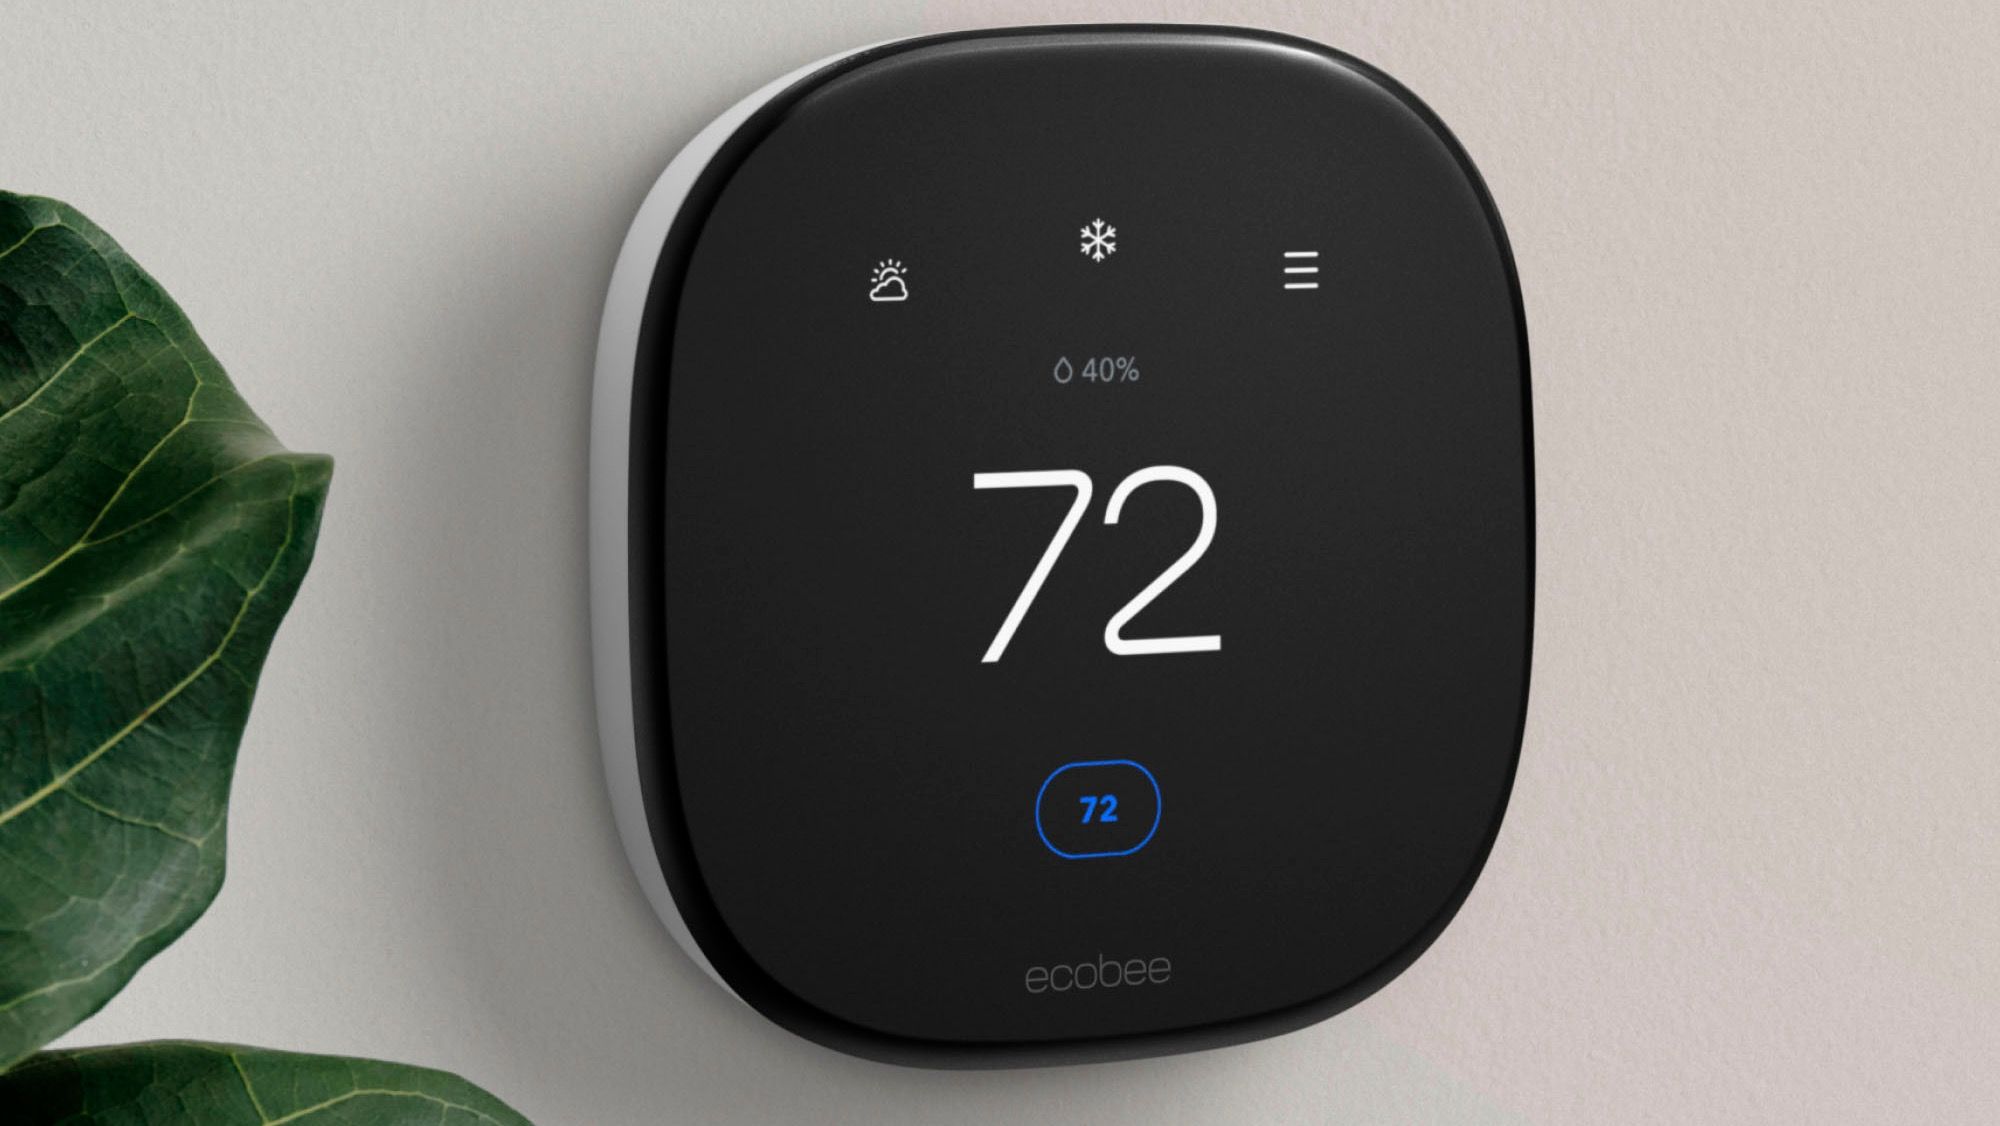 Ecobee’s smart thermostat drops to its lowest price ever for Black Friday